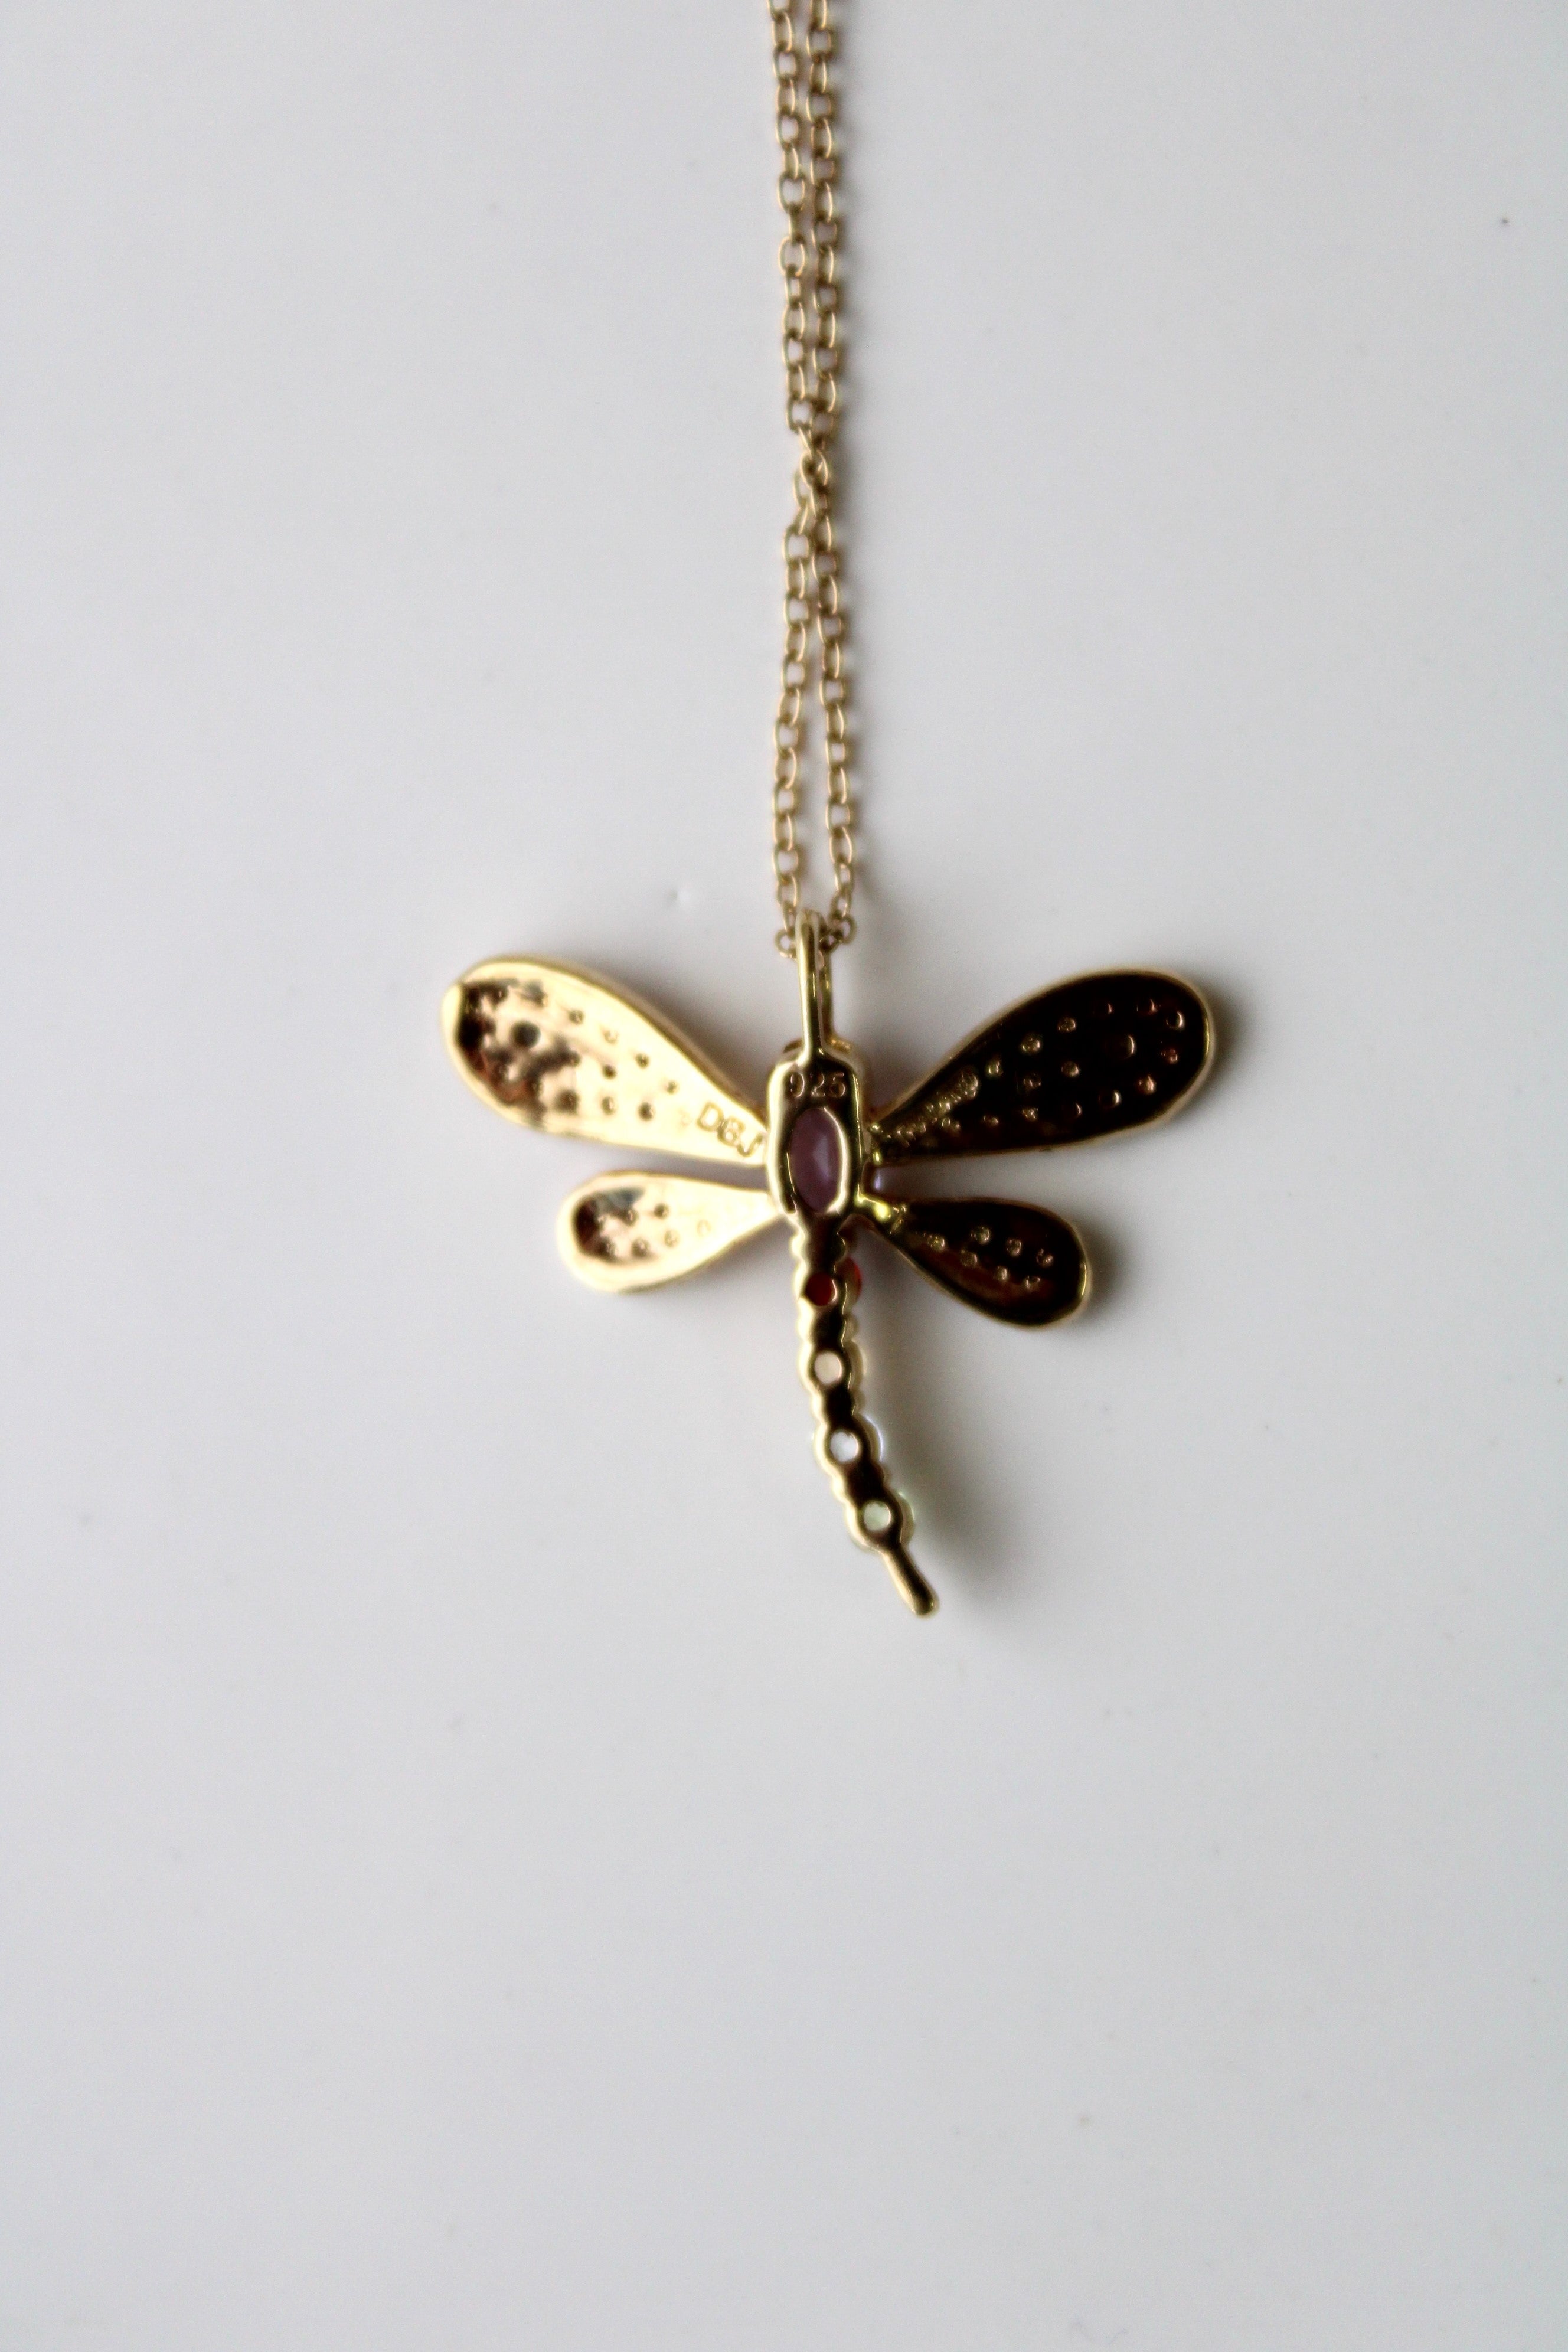 Gold Dragonfly Charm Necklace